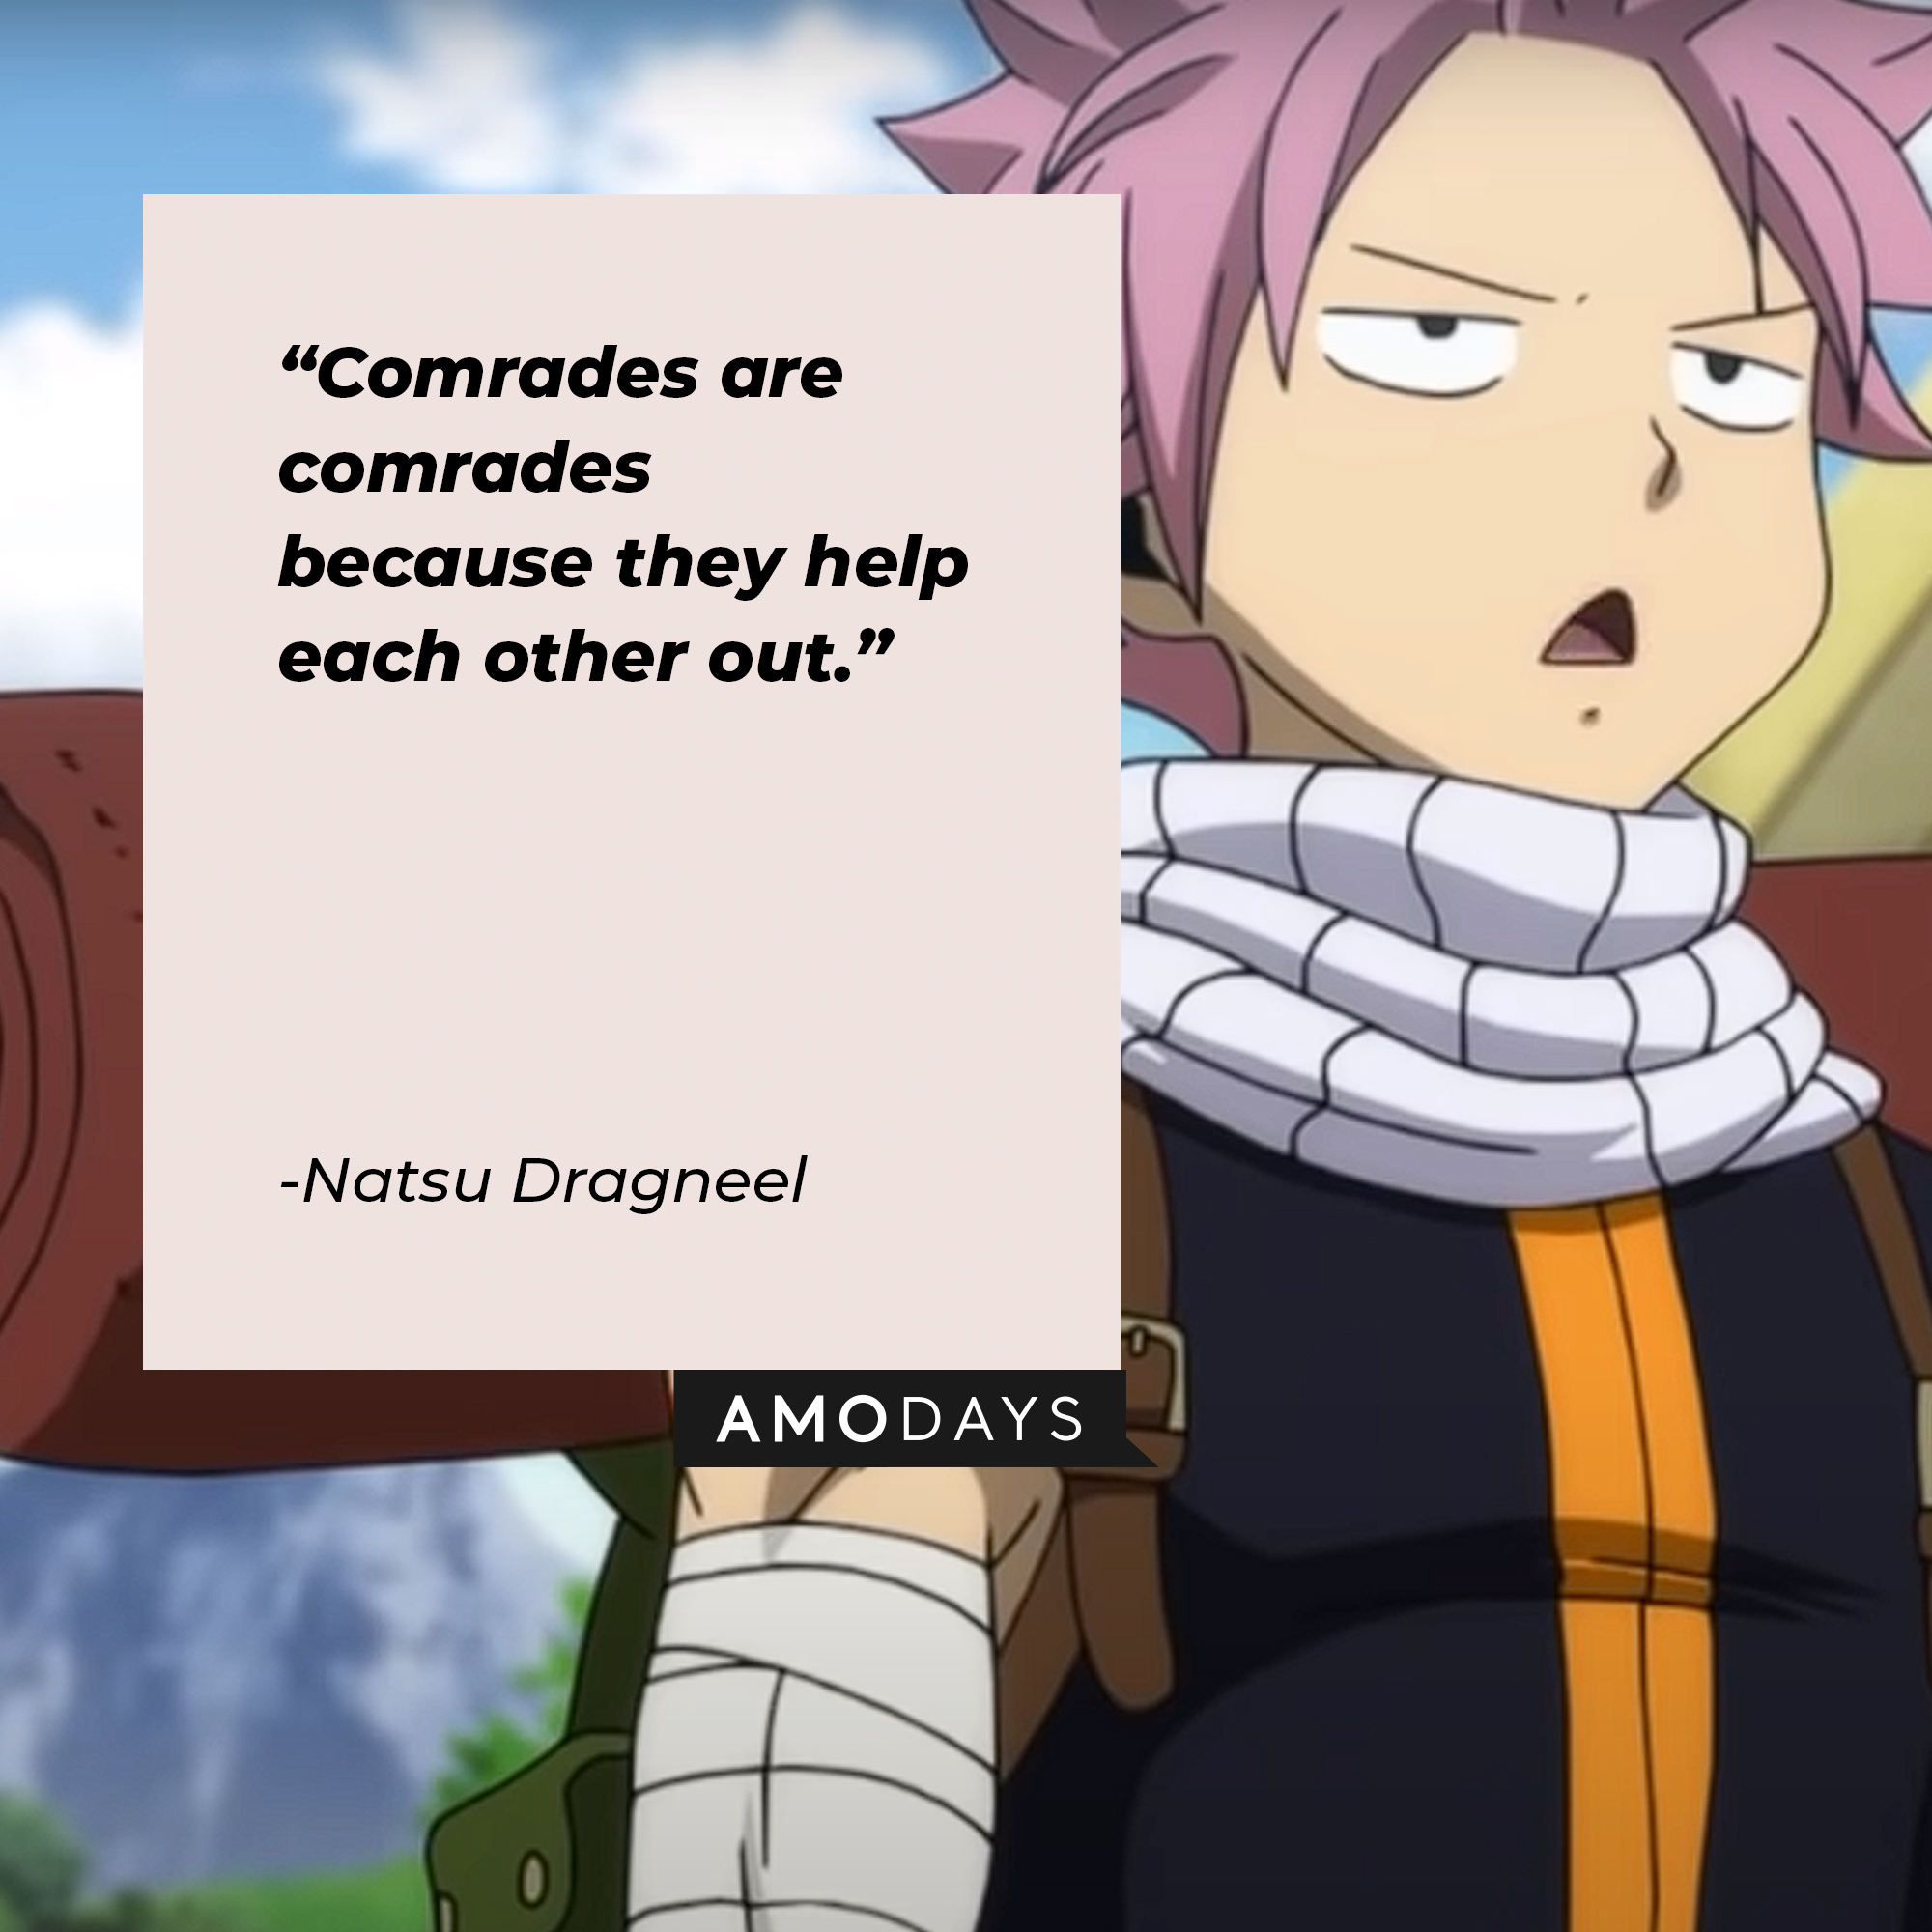 Natsu Dragneel's quote: "Comrades are comrades because they help each other out." | Image: AmoDays